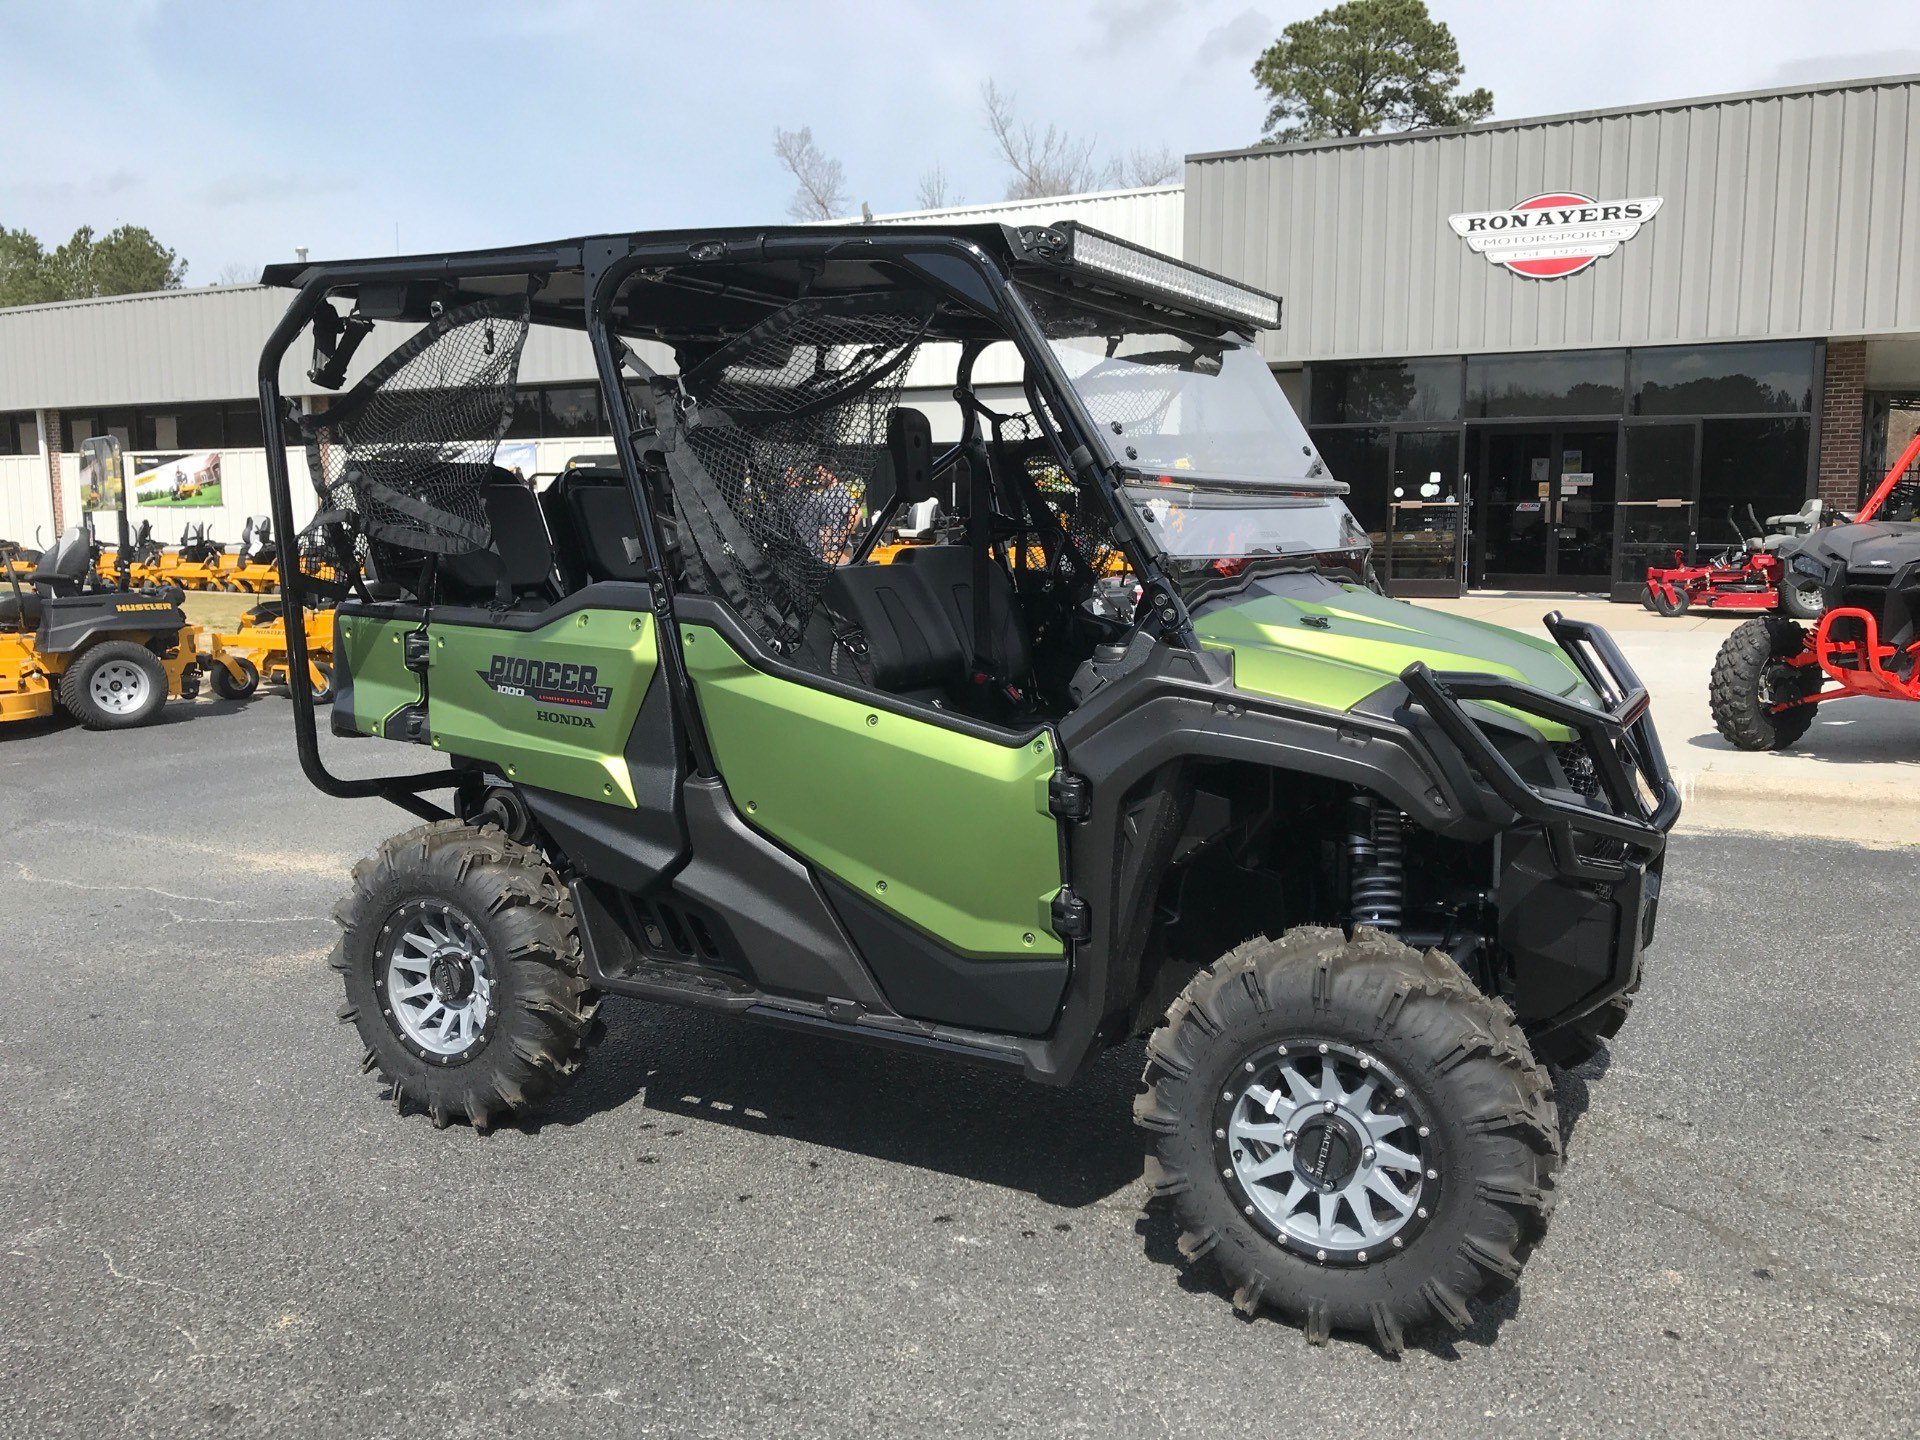 New 2020 Honda Pioneer 10005 LE Utility Vehicles in Greenville, NC